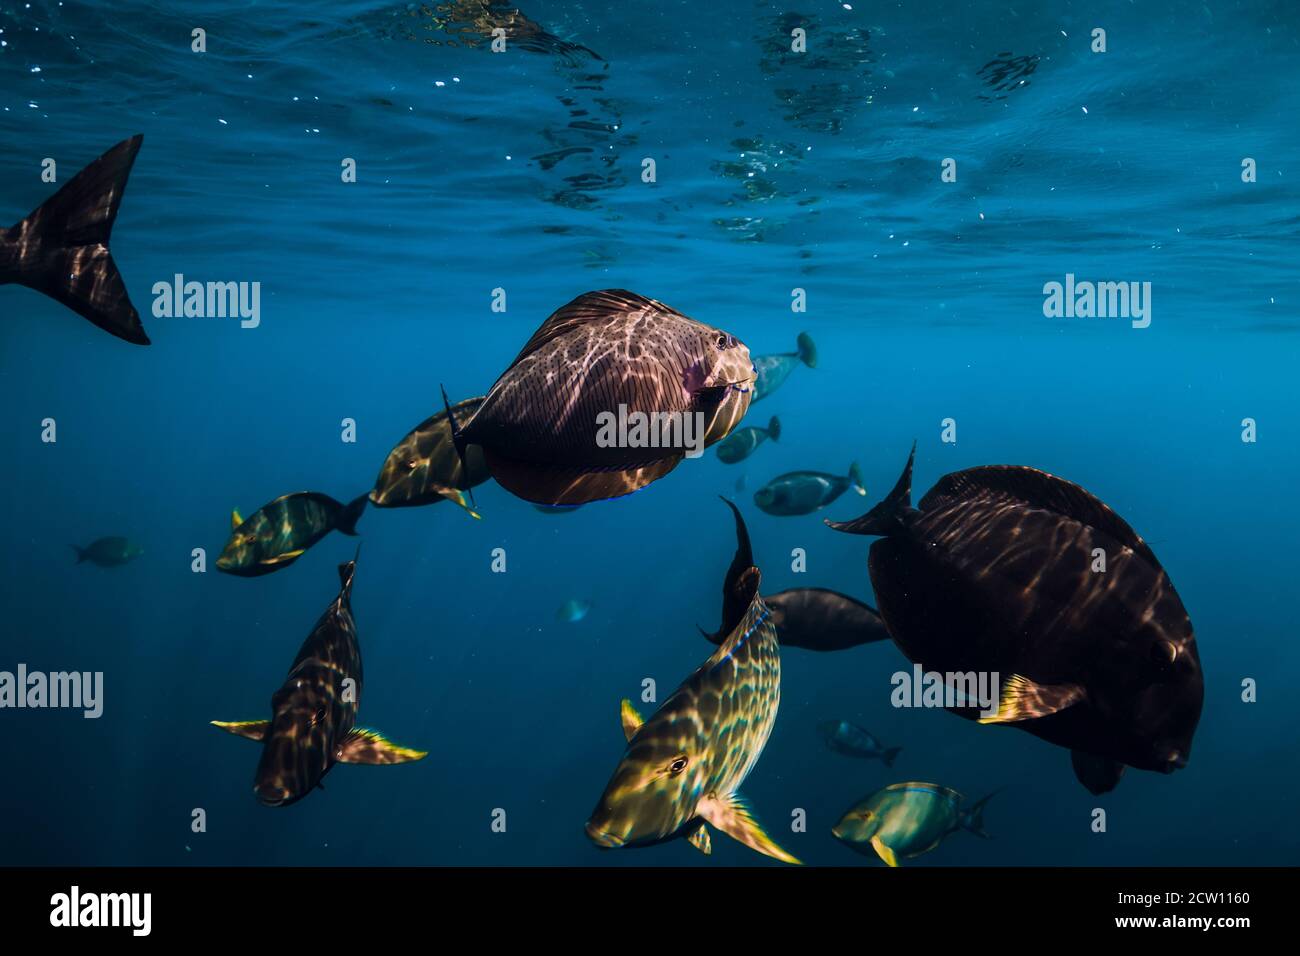 School of tropical fish in blue ocean. Underwater sea world with fishes. Stock Photo